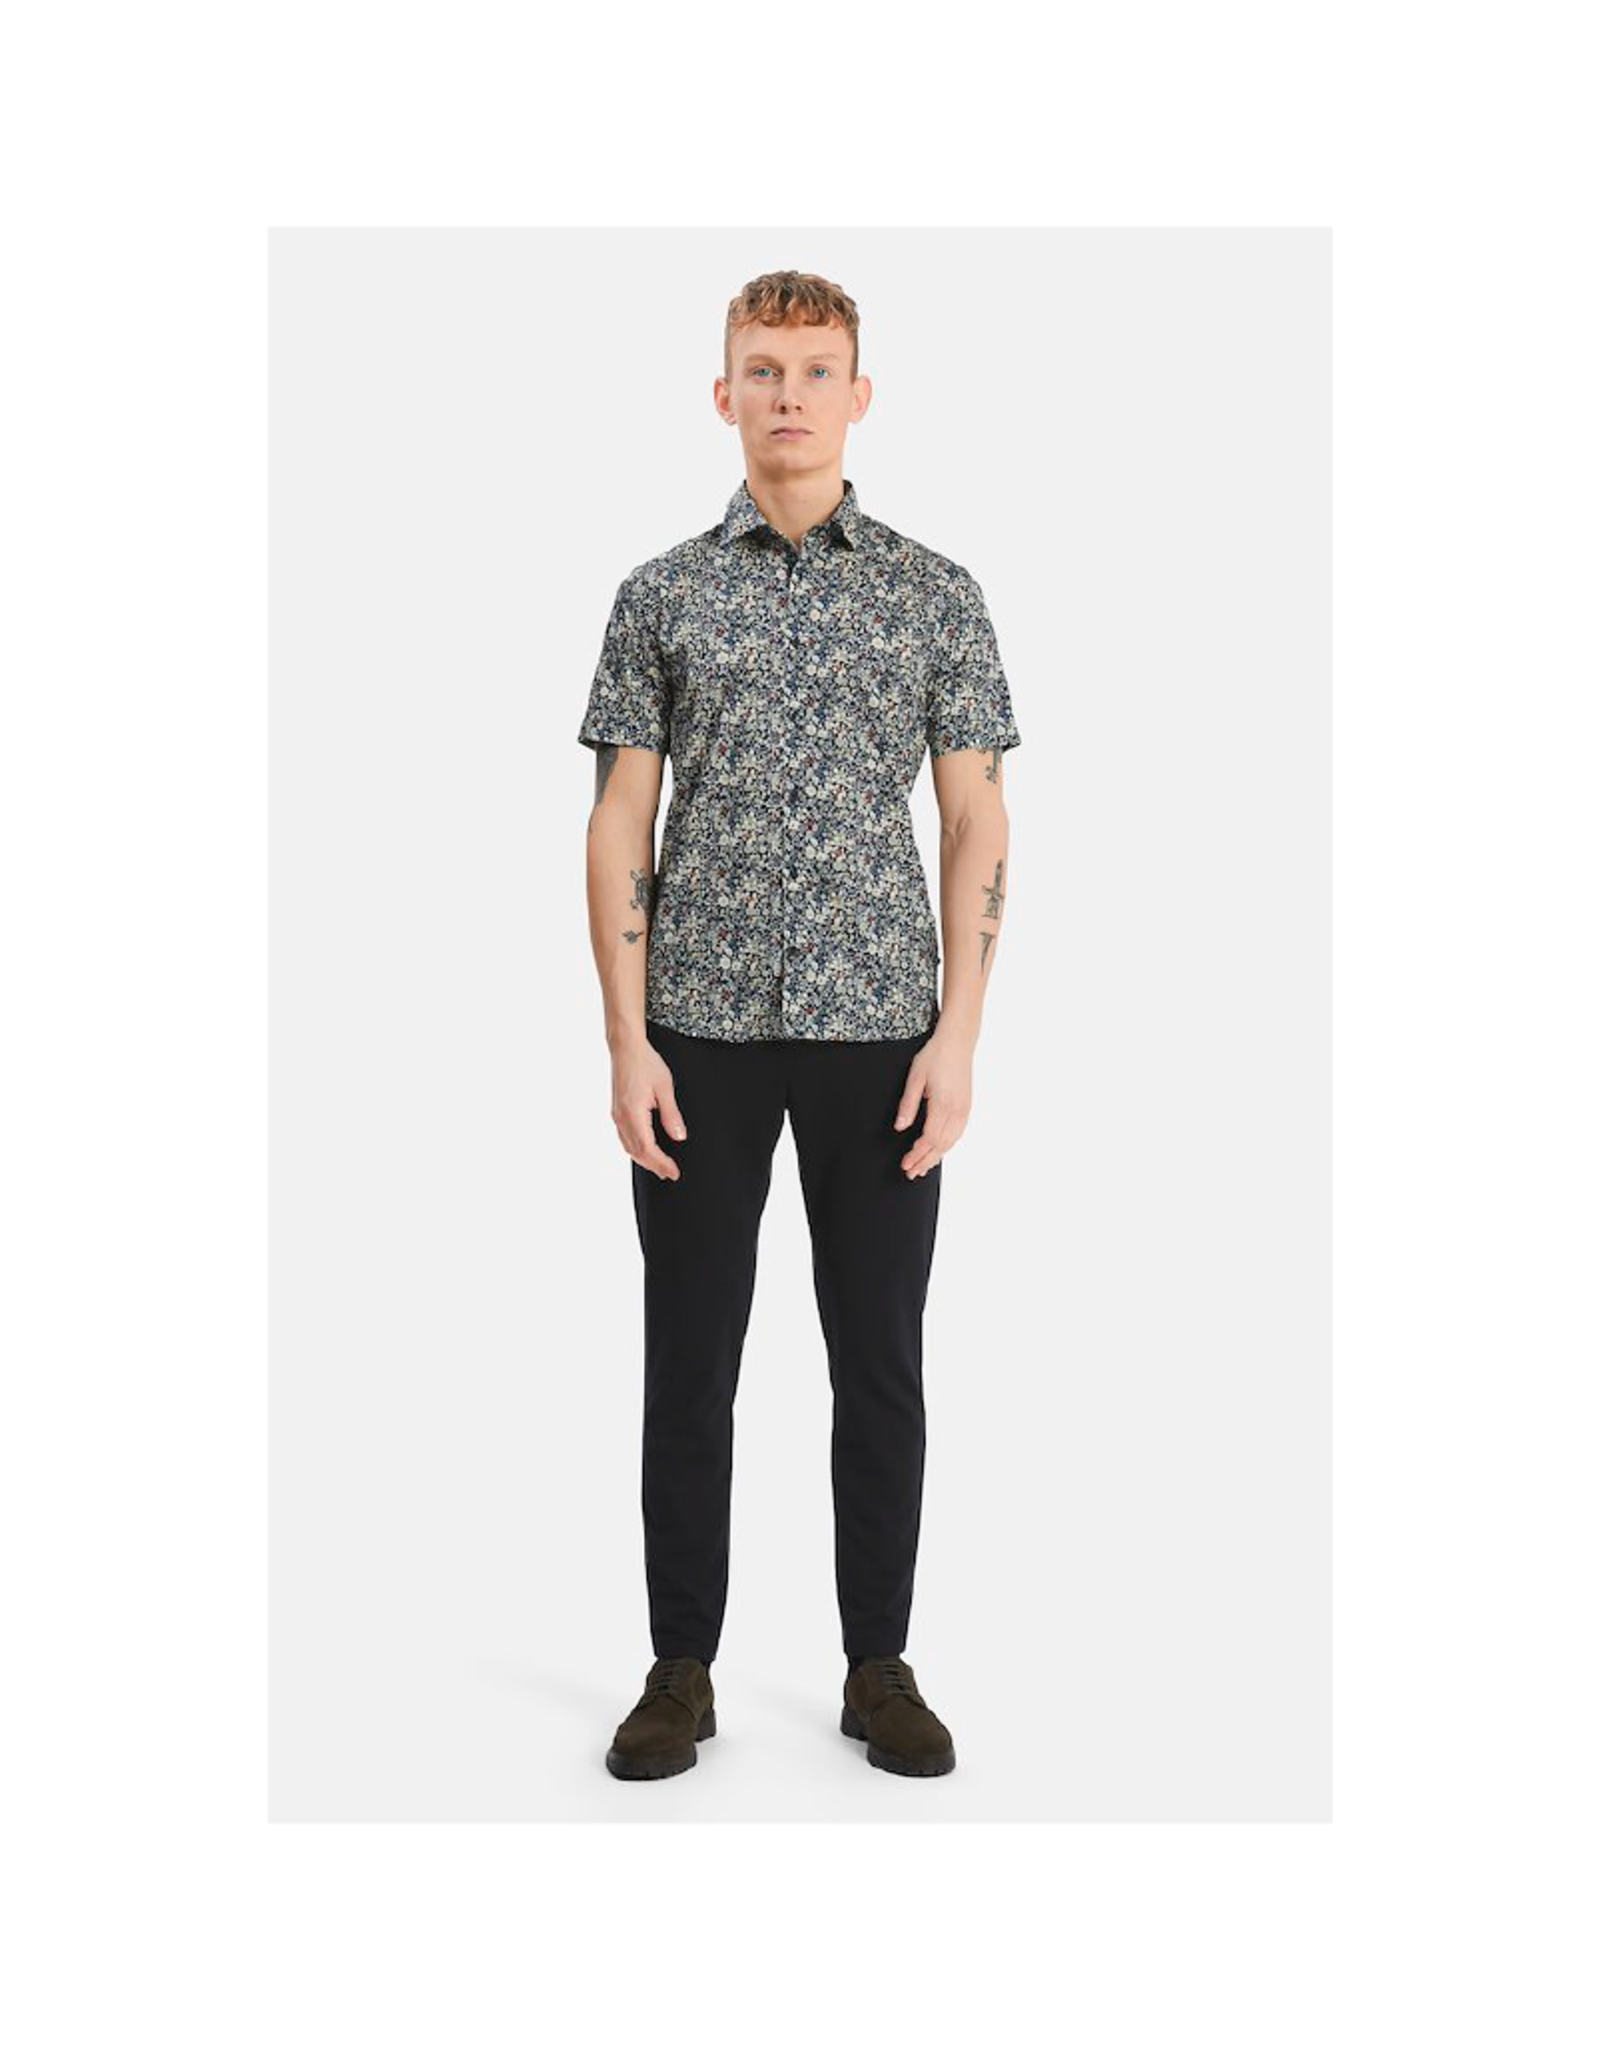 Matinique Trostol Short-Sleeve Micro Floral Button Up